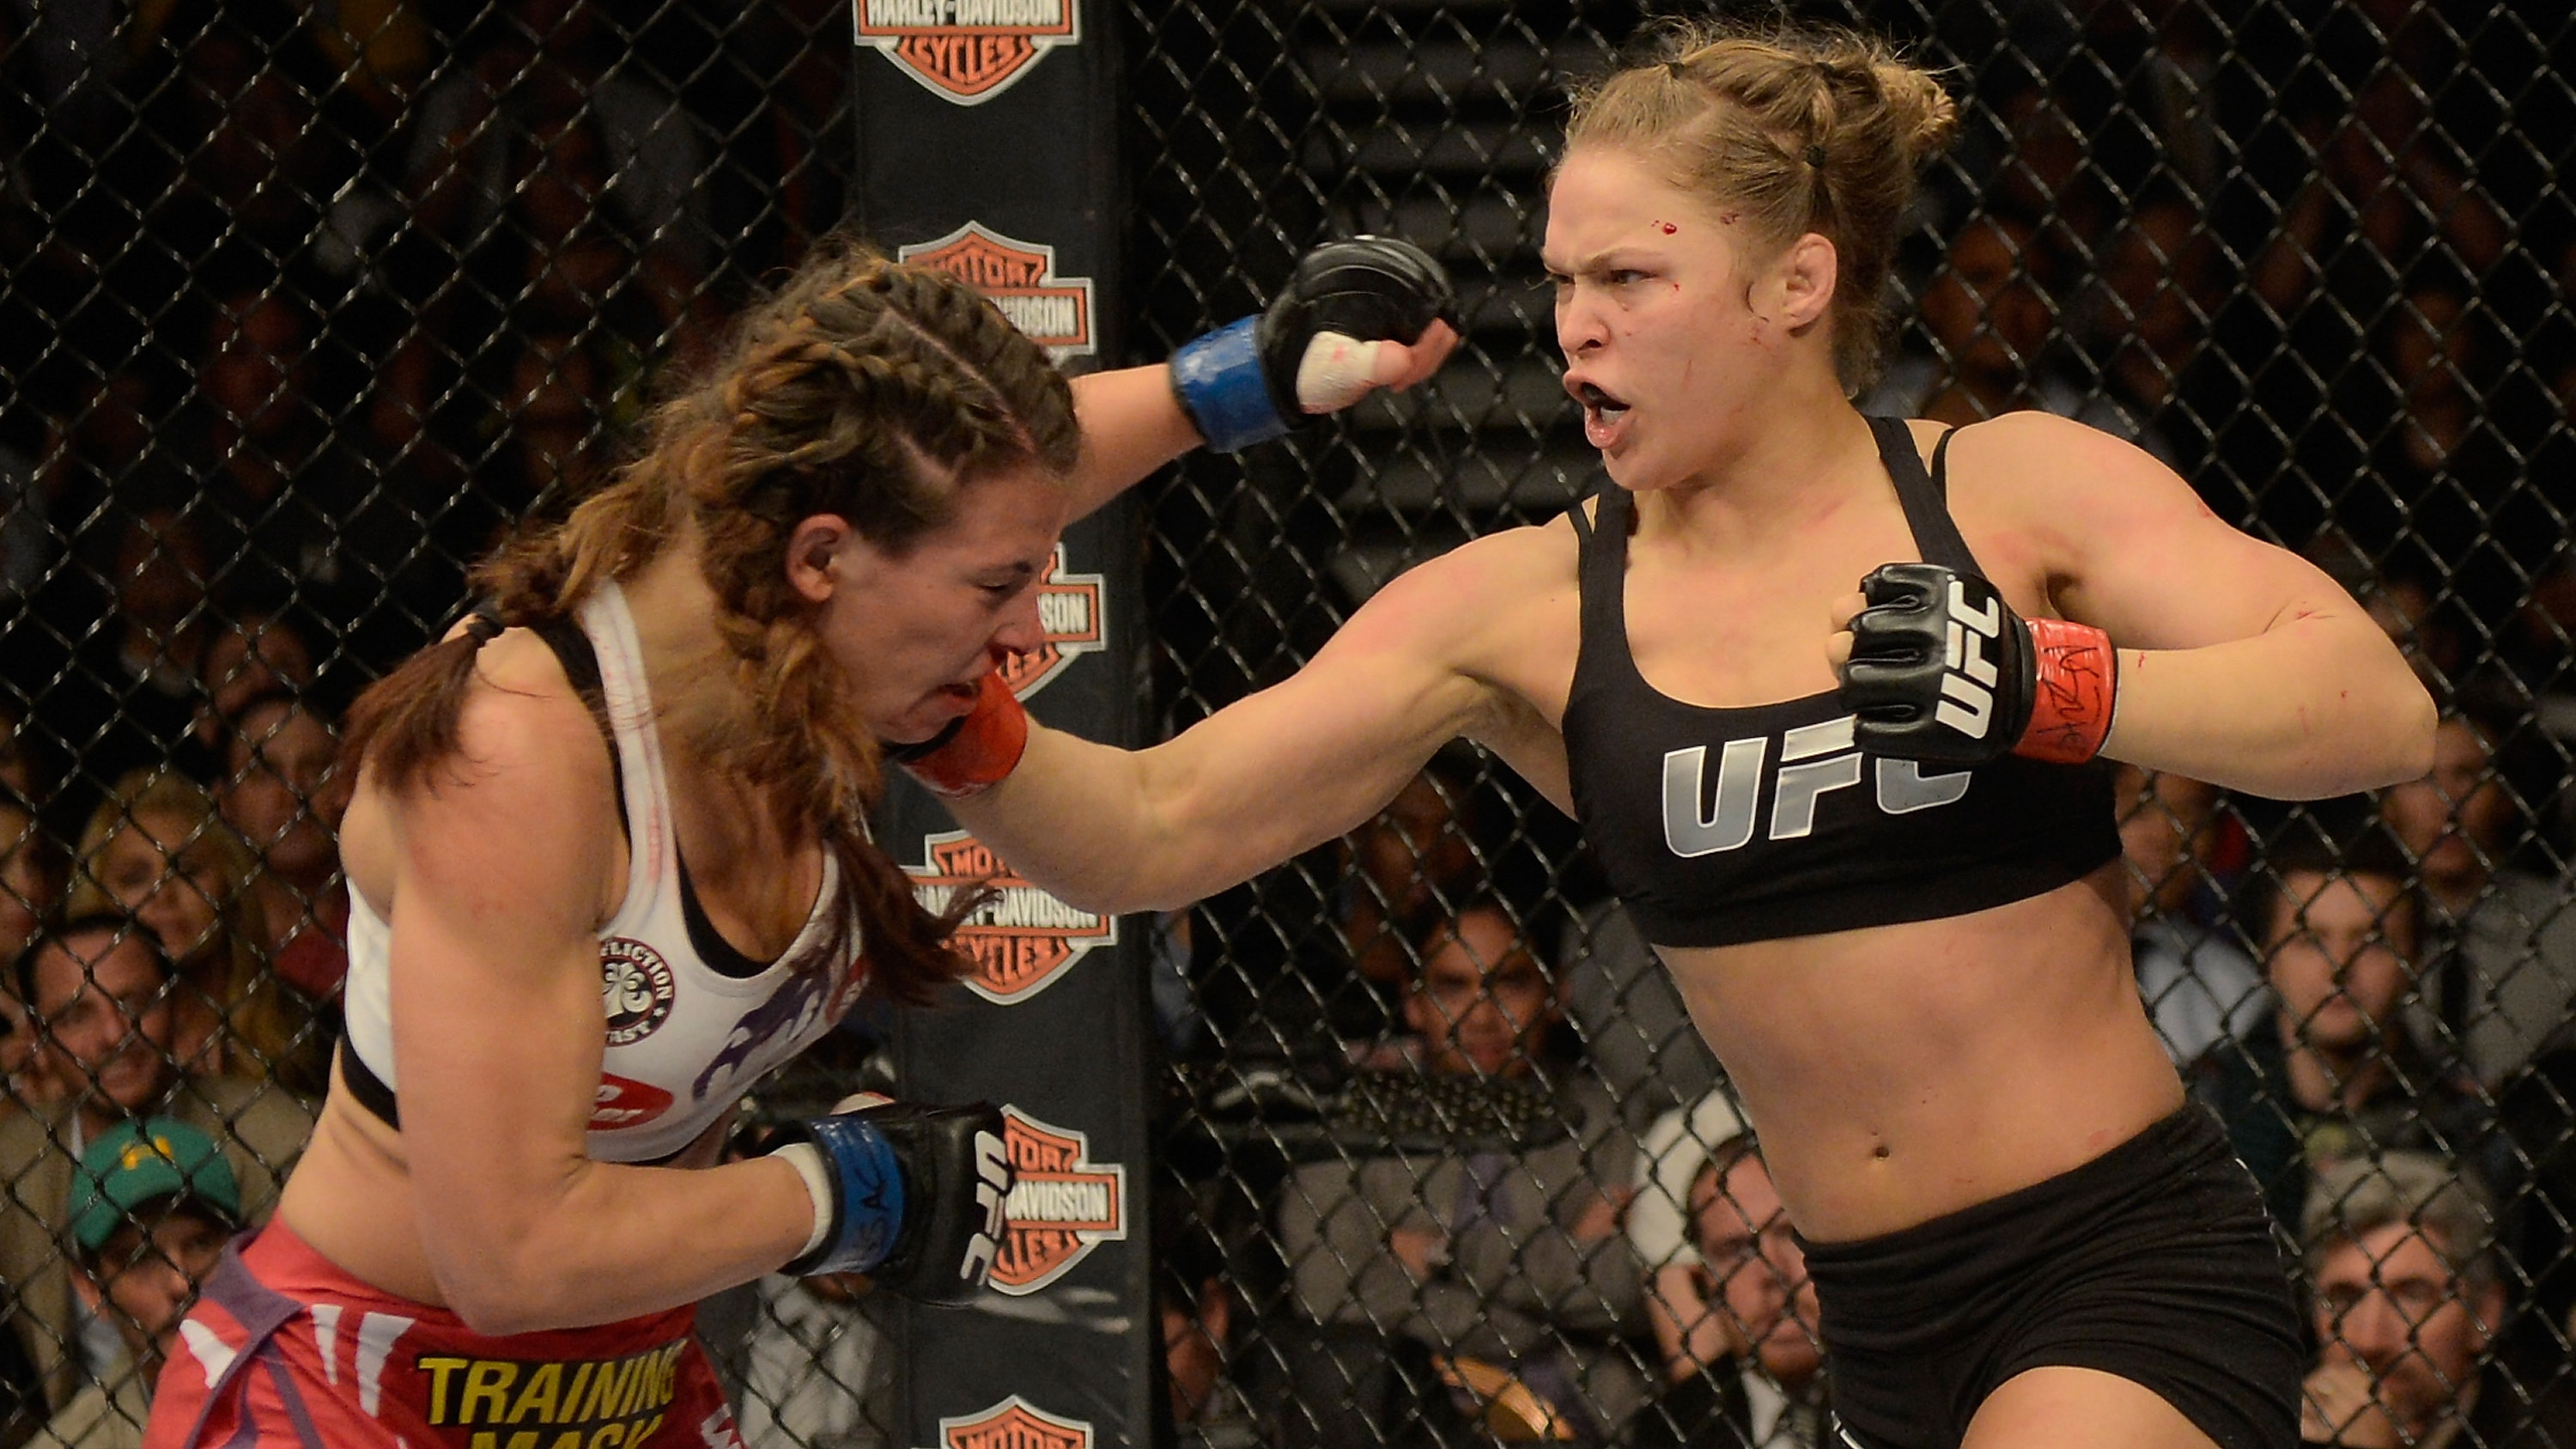 LAS VEGAS, NV - DECEMBER 28: (R-L) Ronda Rousey punches Miesha Tate in their UFC women's bantamweight championship bout during the UFC 168 event at the MGM Grand Garden Arena on December 28, 2013 in Las Vegas, Nevada. (Photo by Donald Miralle/Zuffa LLC via Getty Images)